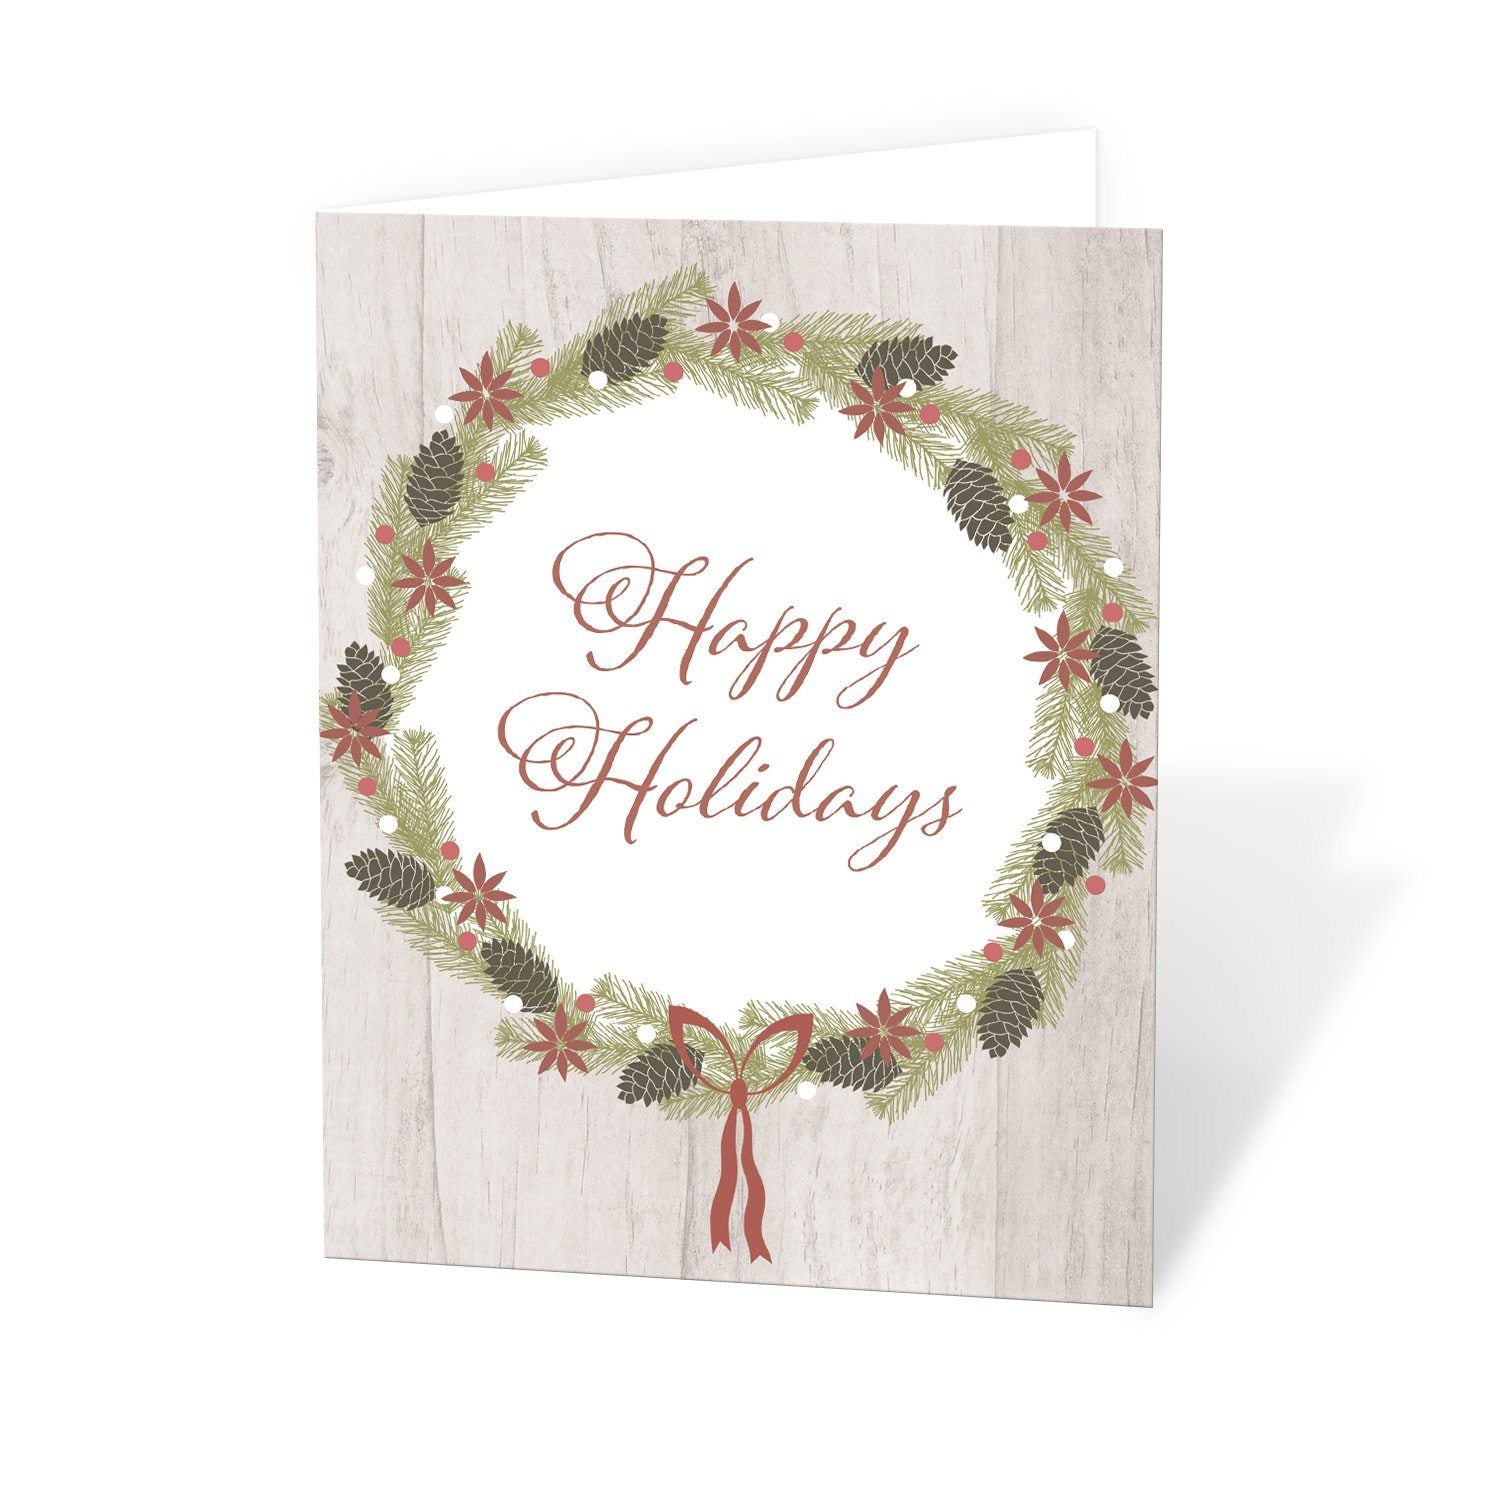 Rustic Pine Cone Wreath Happy Holidays Christmas Cards at Artistically Invited